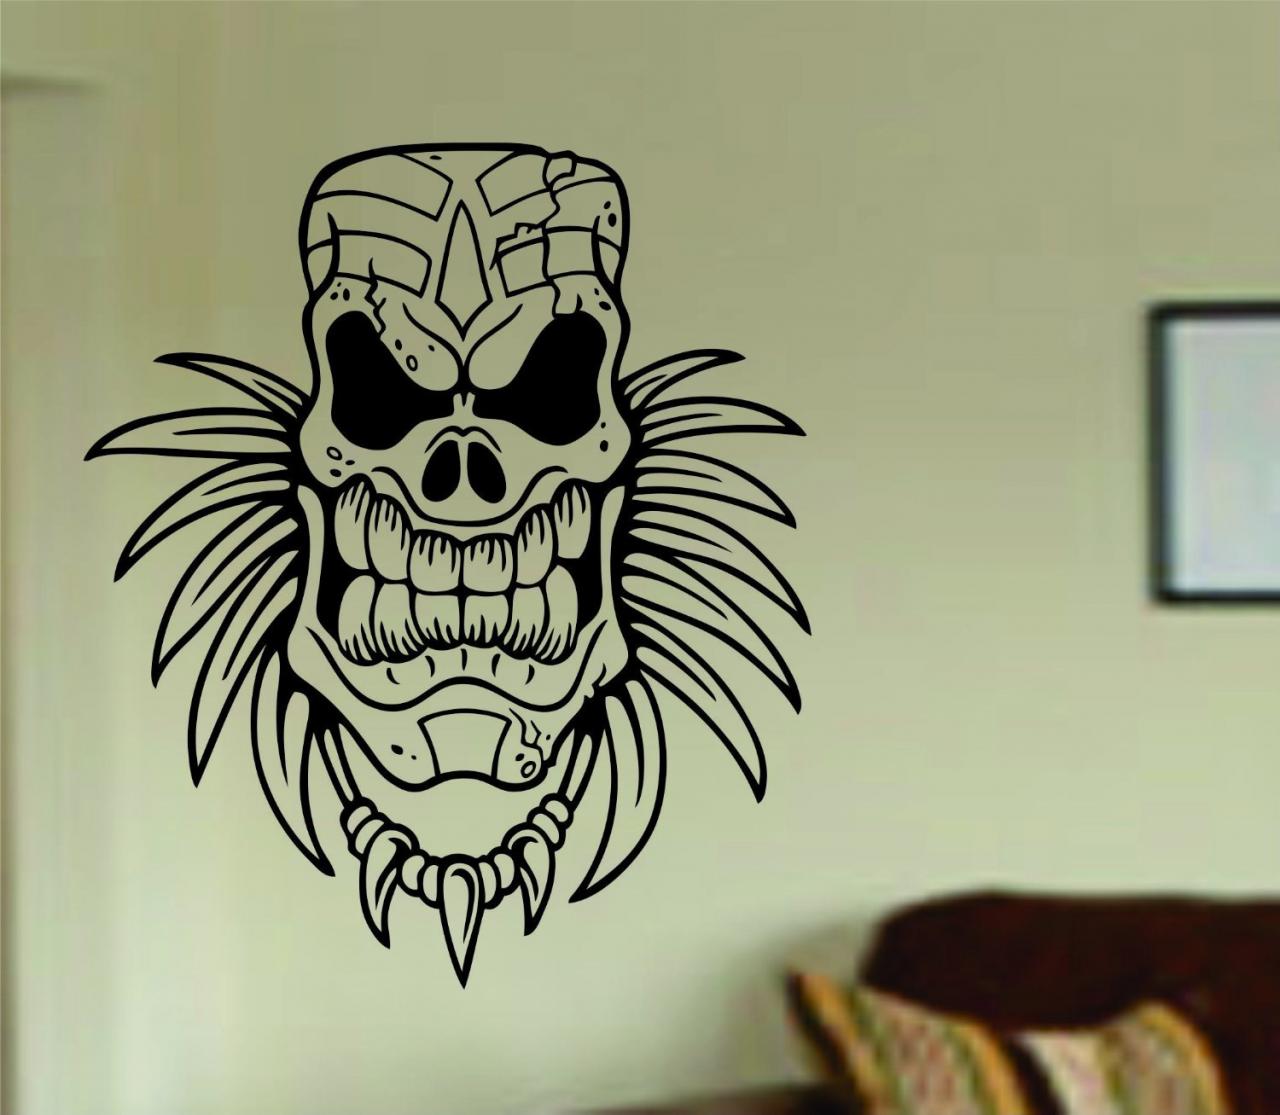 Tiki Skull Decal Sticker Wall Mural Art Graphic Vintage Baby Nursery Office Room Boy Girl Central Eastern Polynesian Day of the dead